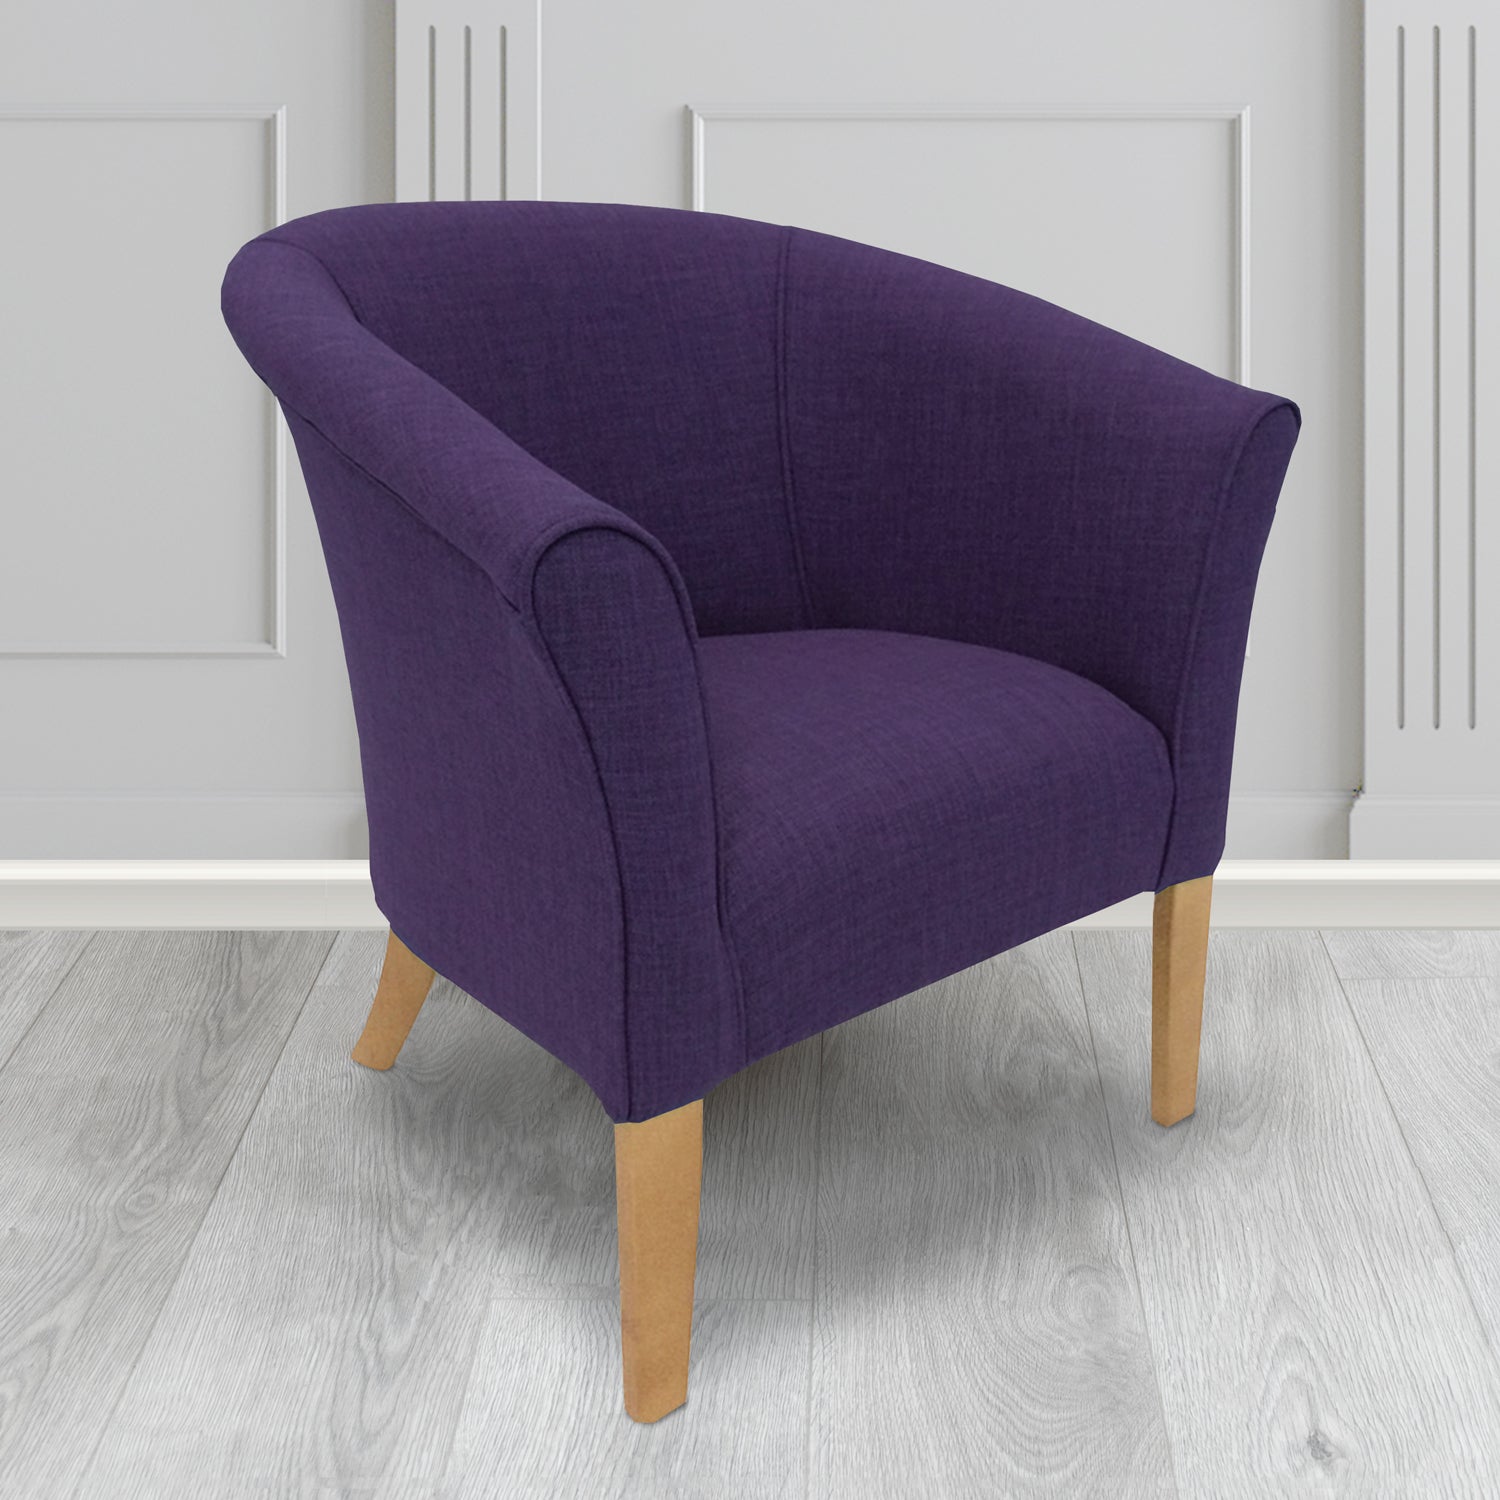 Quill Tub Chair in Linetta Violet Crib 5 Plain Fabric - Antimicrobial, Stain Resistant & Waterproof - The Tub Chair Shop